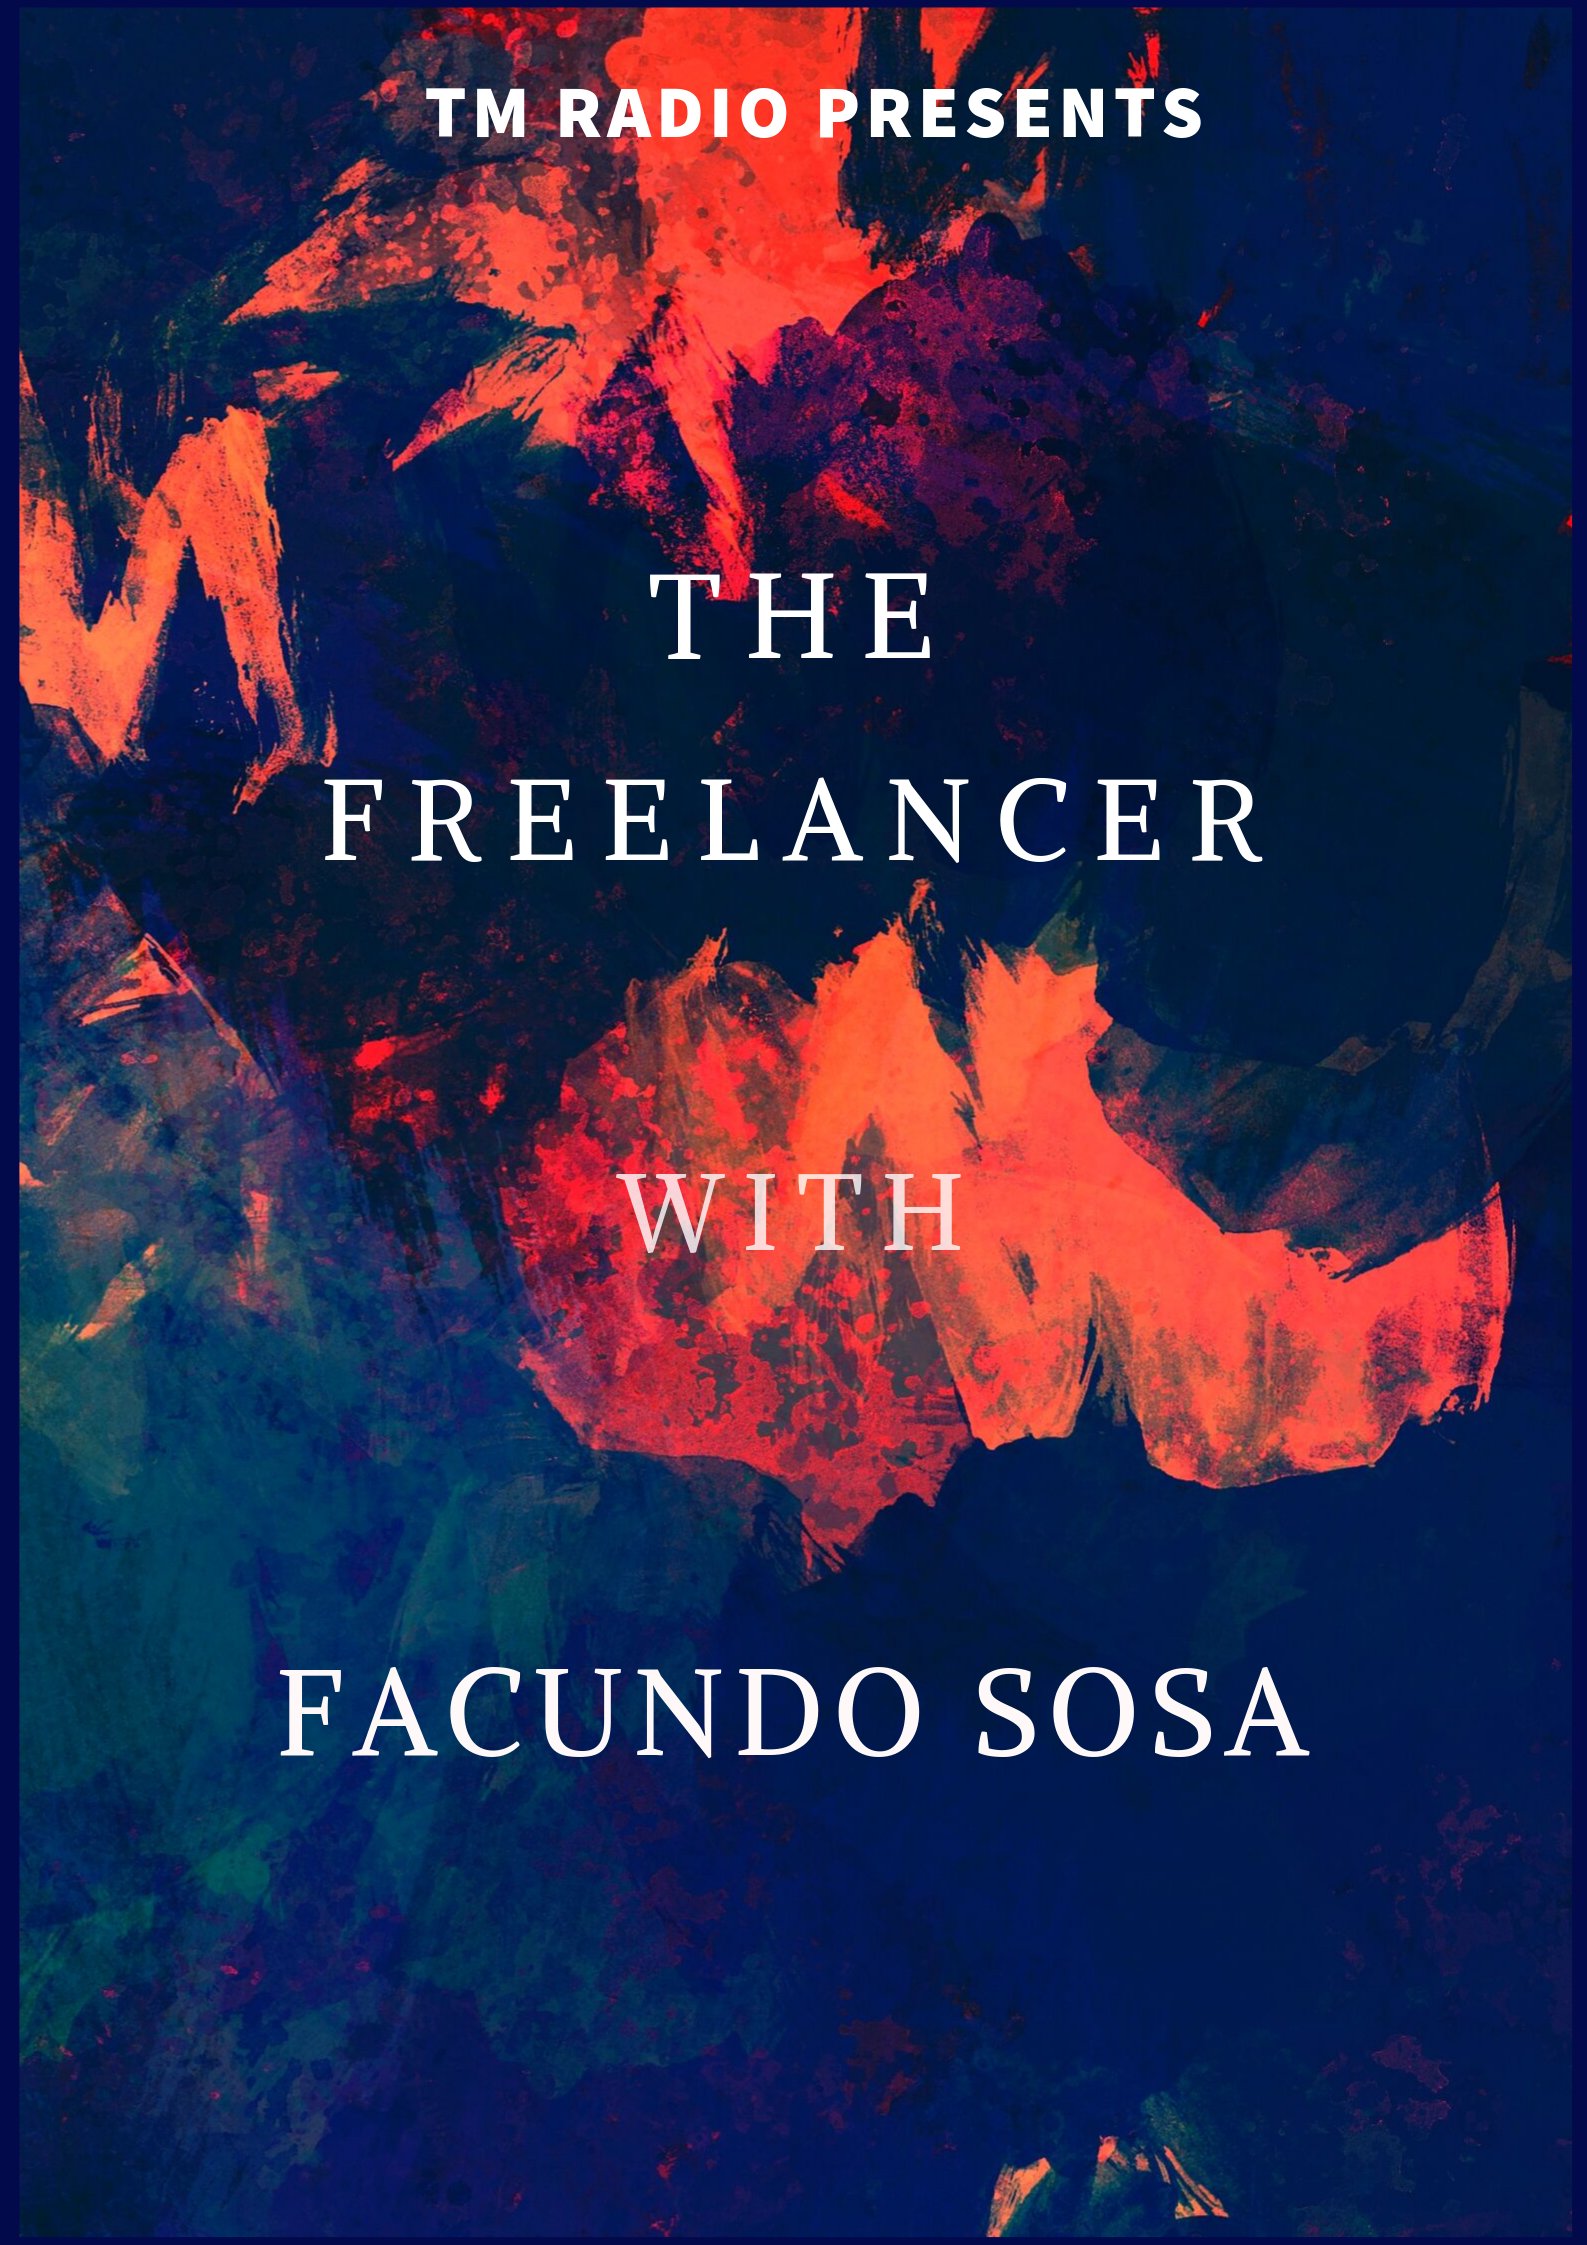 The Freelancer :: Episode 021 (aired on March 28th, 2021) banner logo